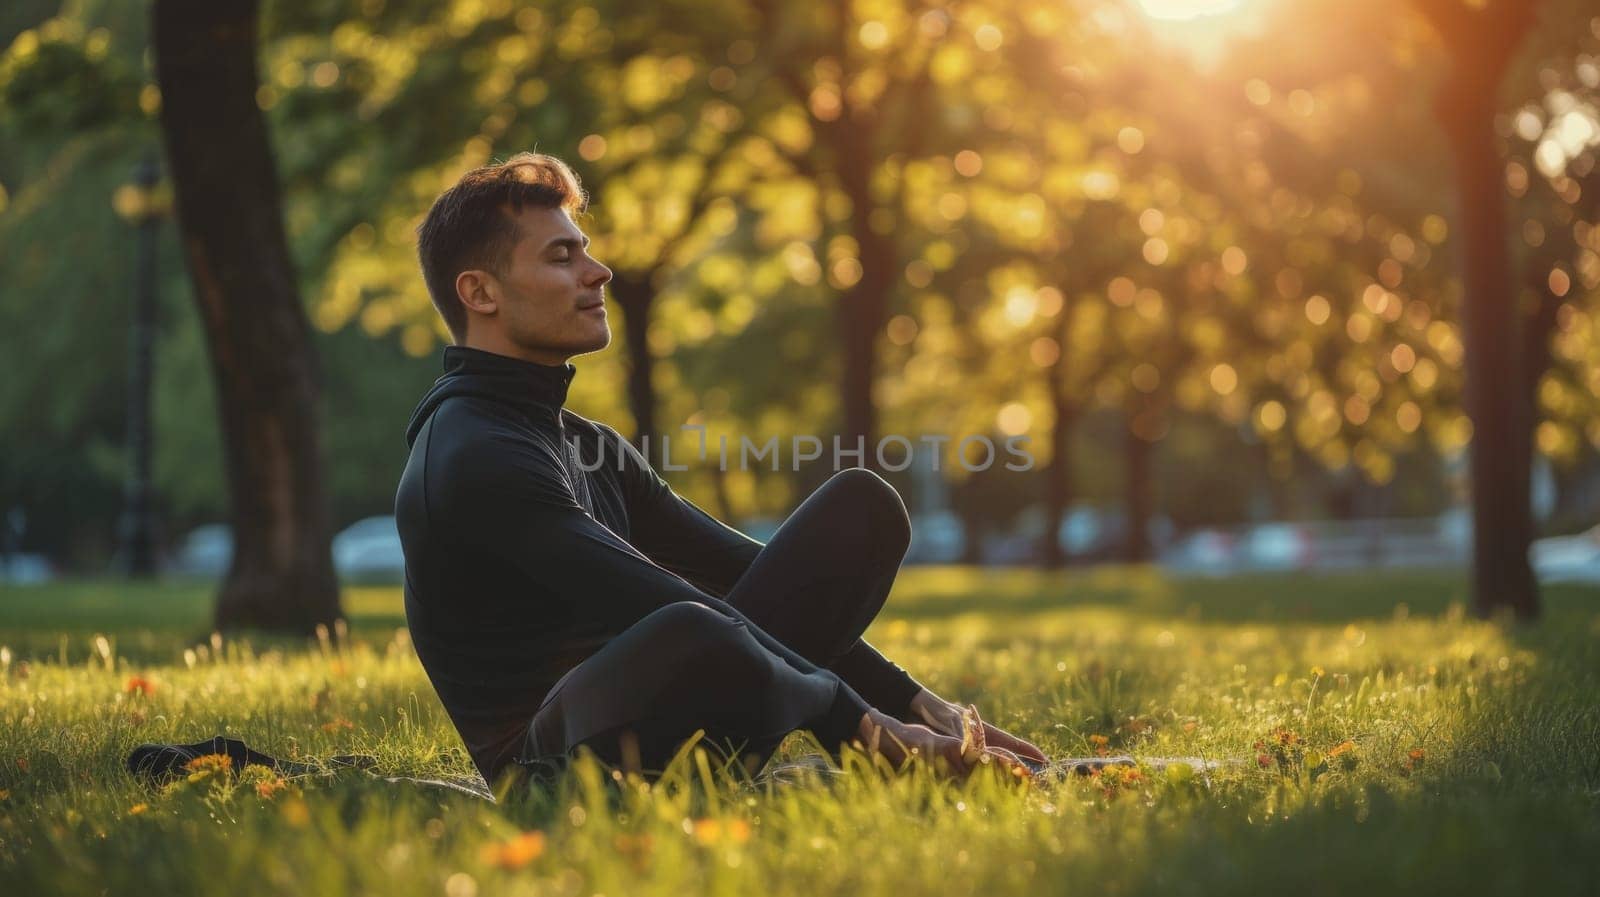 A man sitting on the grass in a park with trees behind him